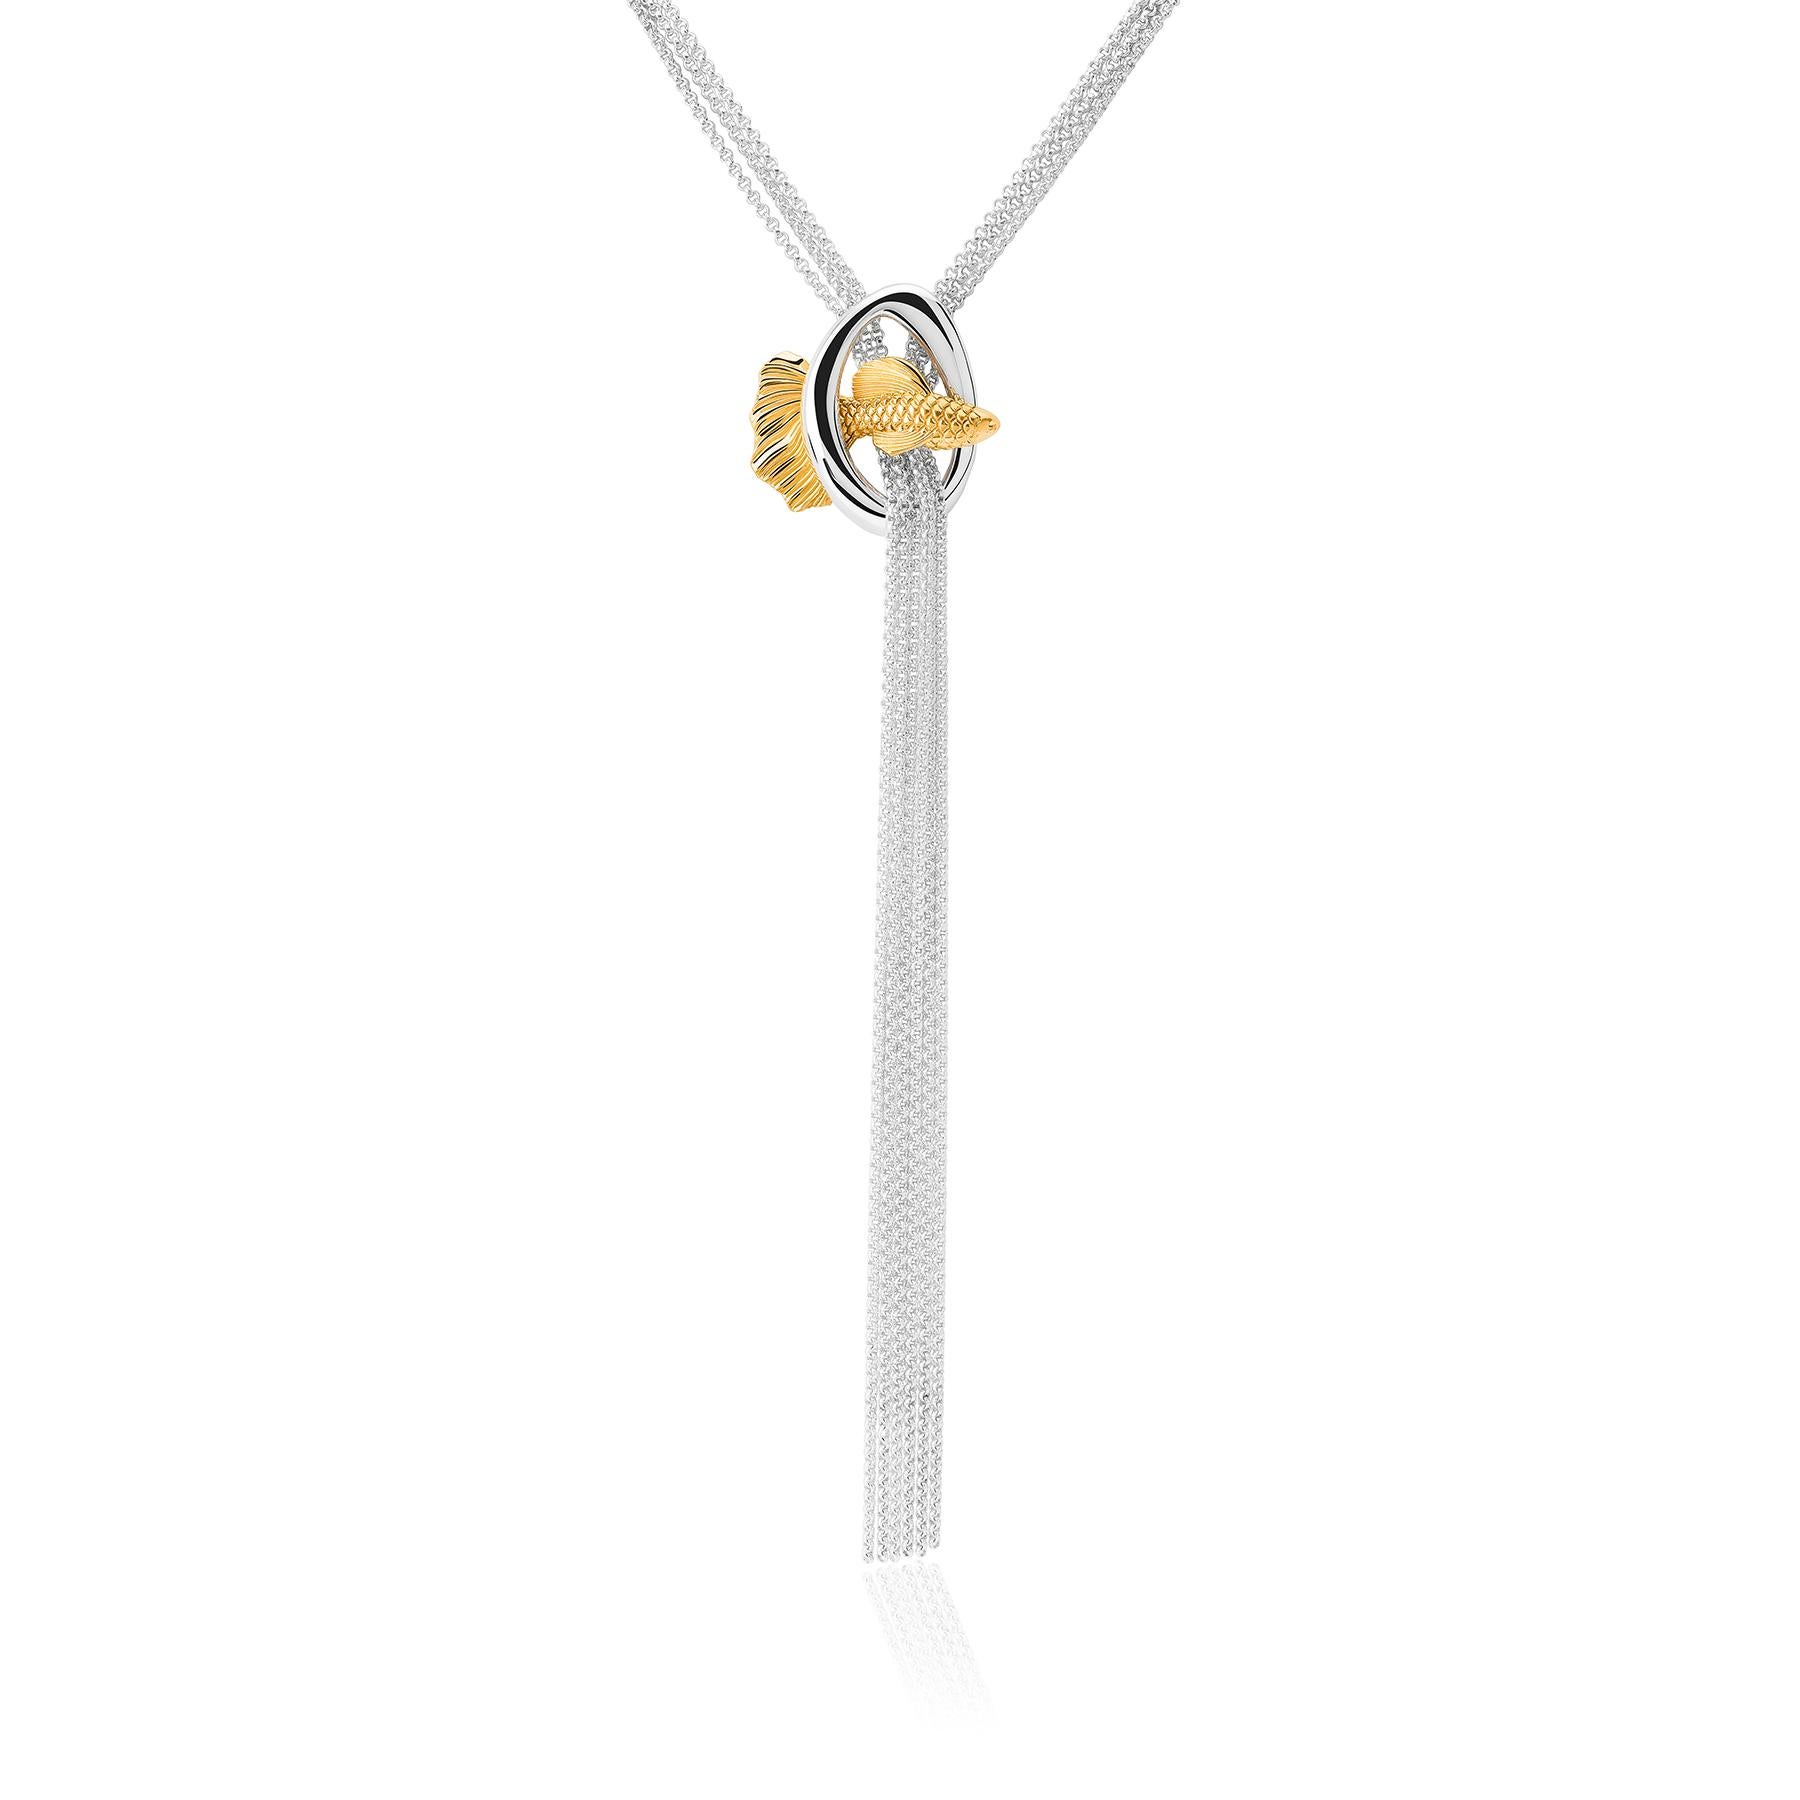 The Fish Necklace from the Animals Collection by TANE is made of sterling silver with 23 karat yellow gold vermeil. Suspended from a set of 23.6” chains, you will find an irregular link designed for the collection, inspired by nature. Through the